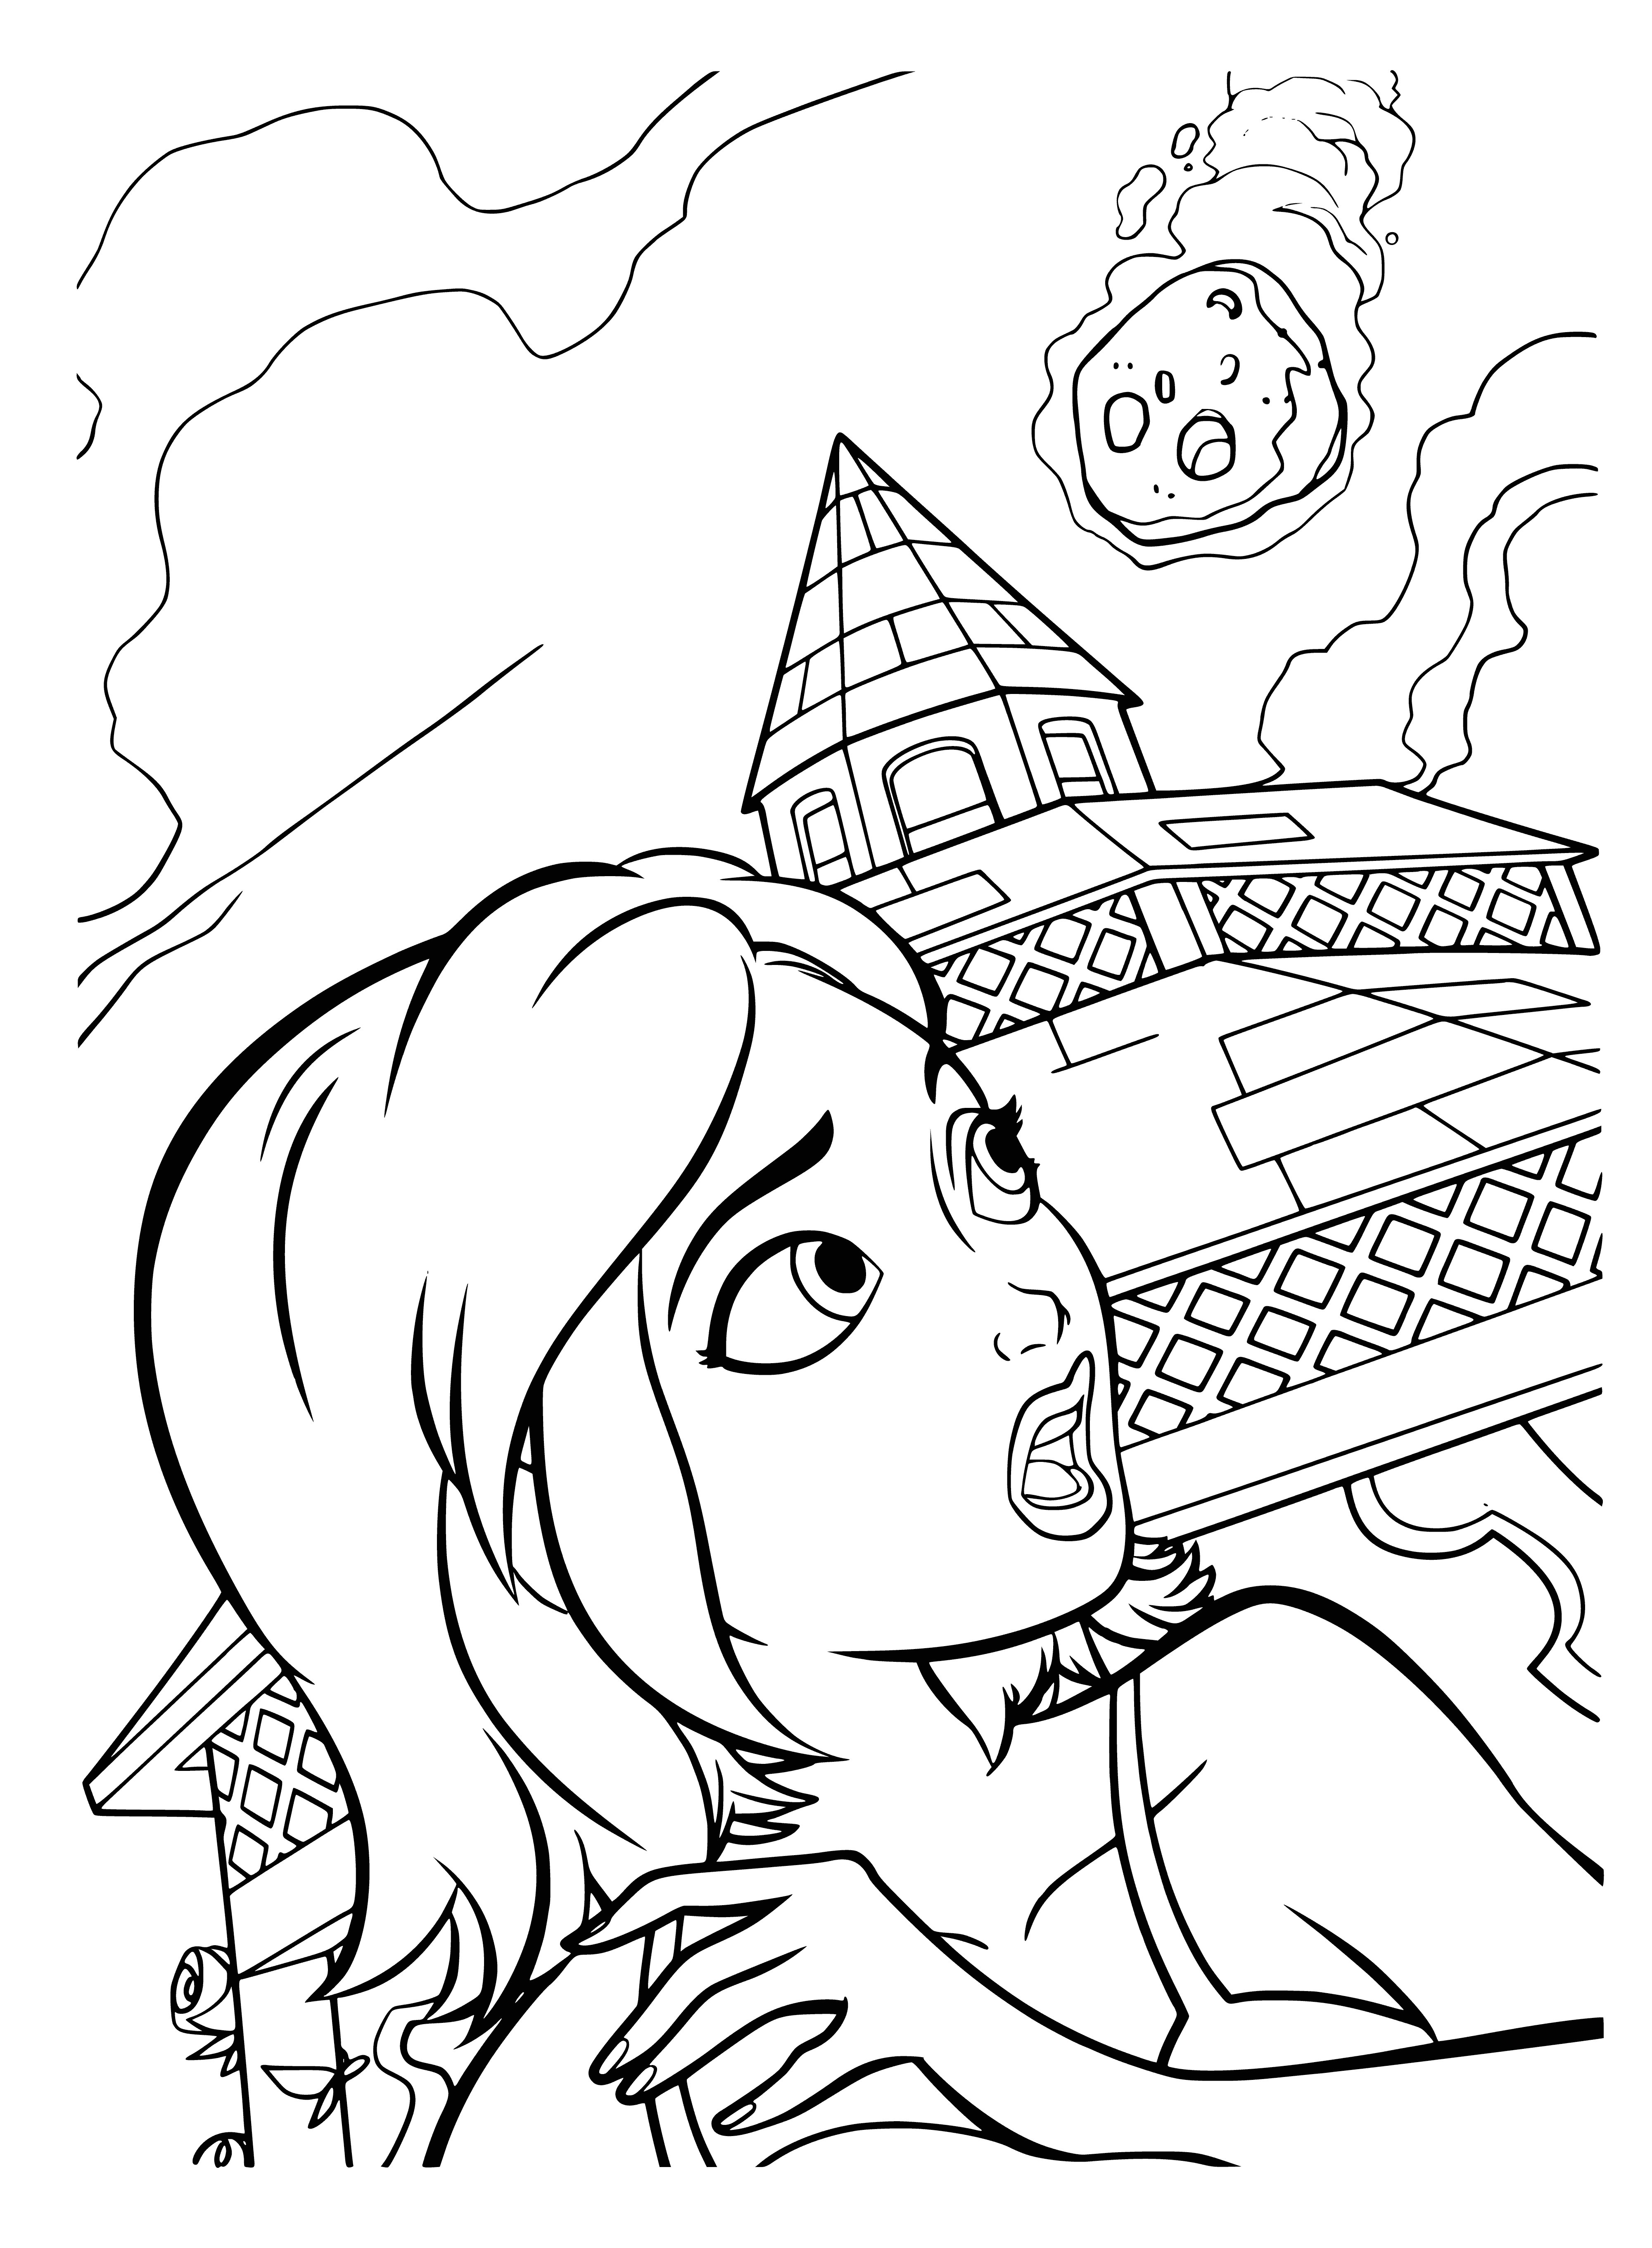 coloring page: Woman stands in a desert, wearing a long, green dress and a rock on her head.